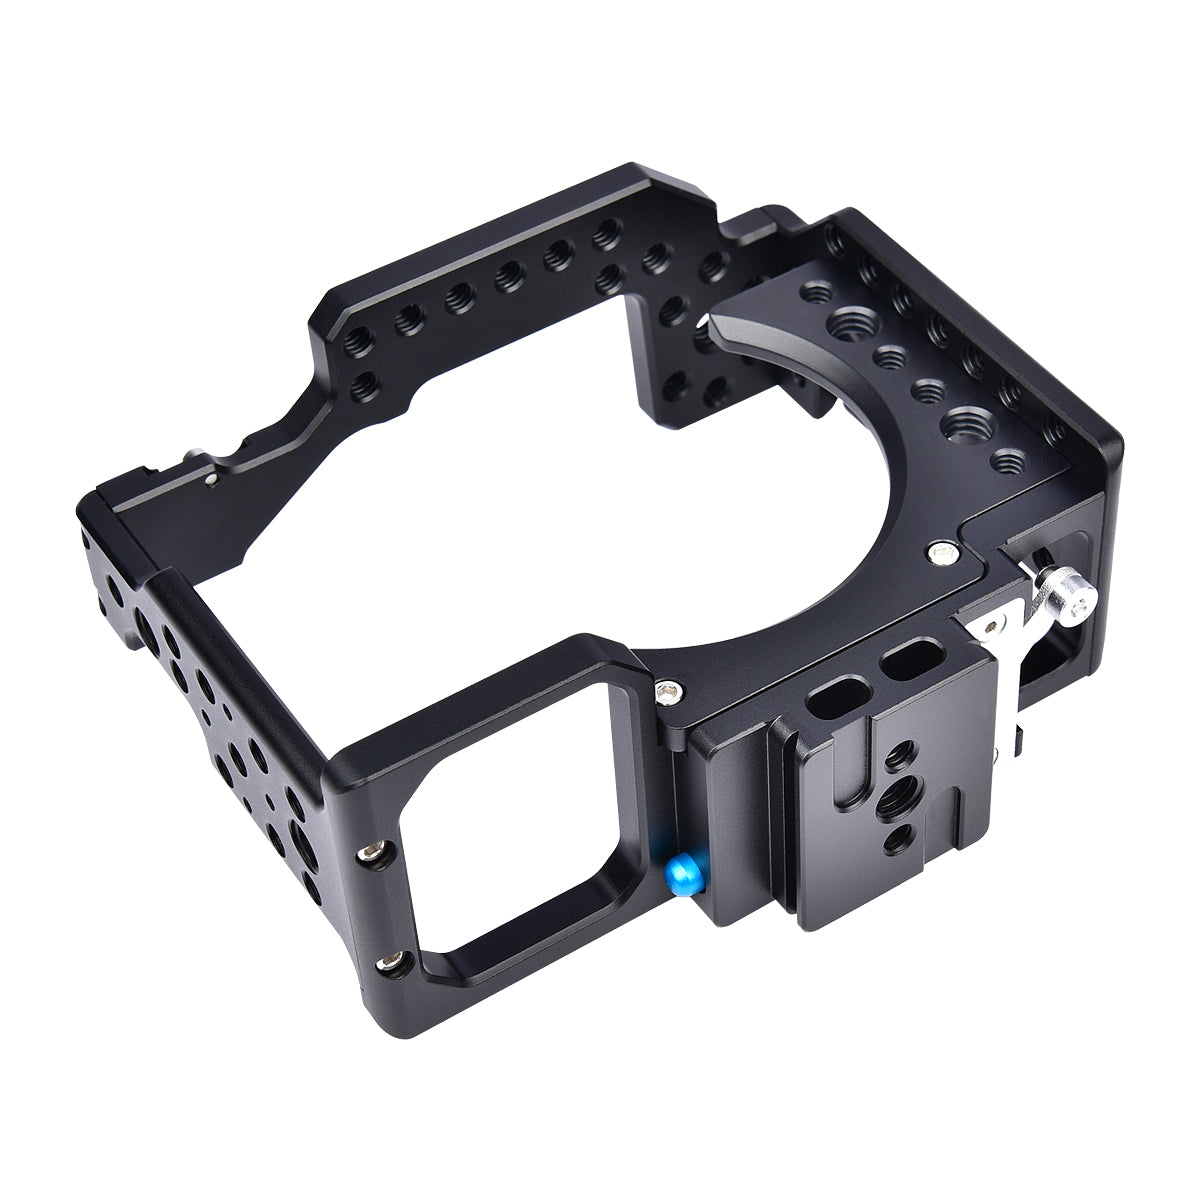 Yelangu Ca7 Camera Cage Kit for Sony Alpha A7 with 3/8 1/4 Inch Screw Top handle Cold Shoe